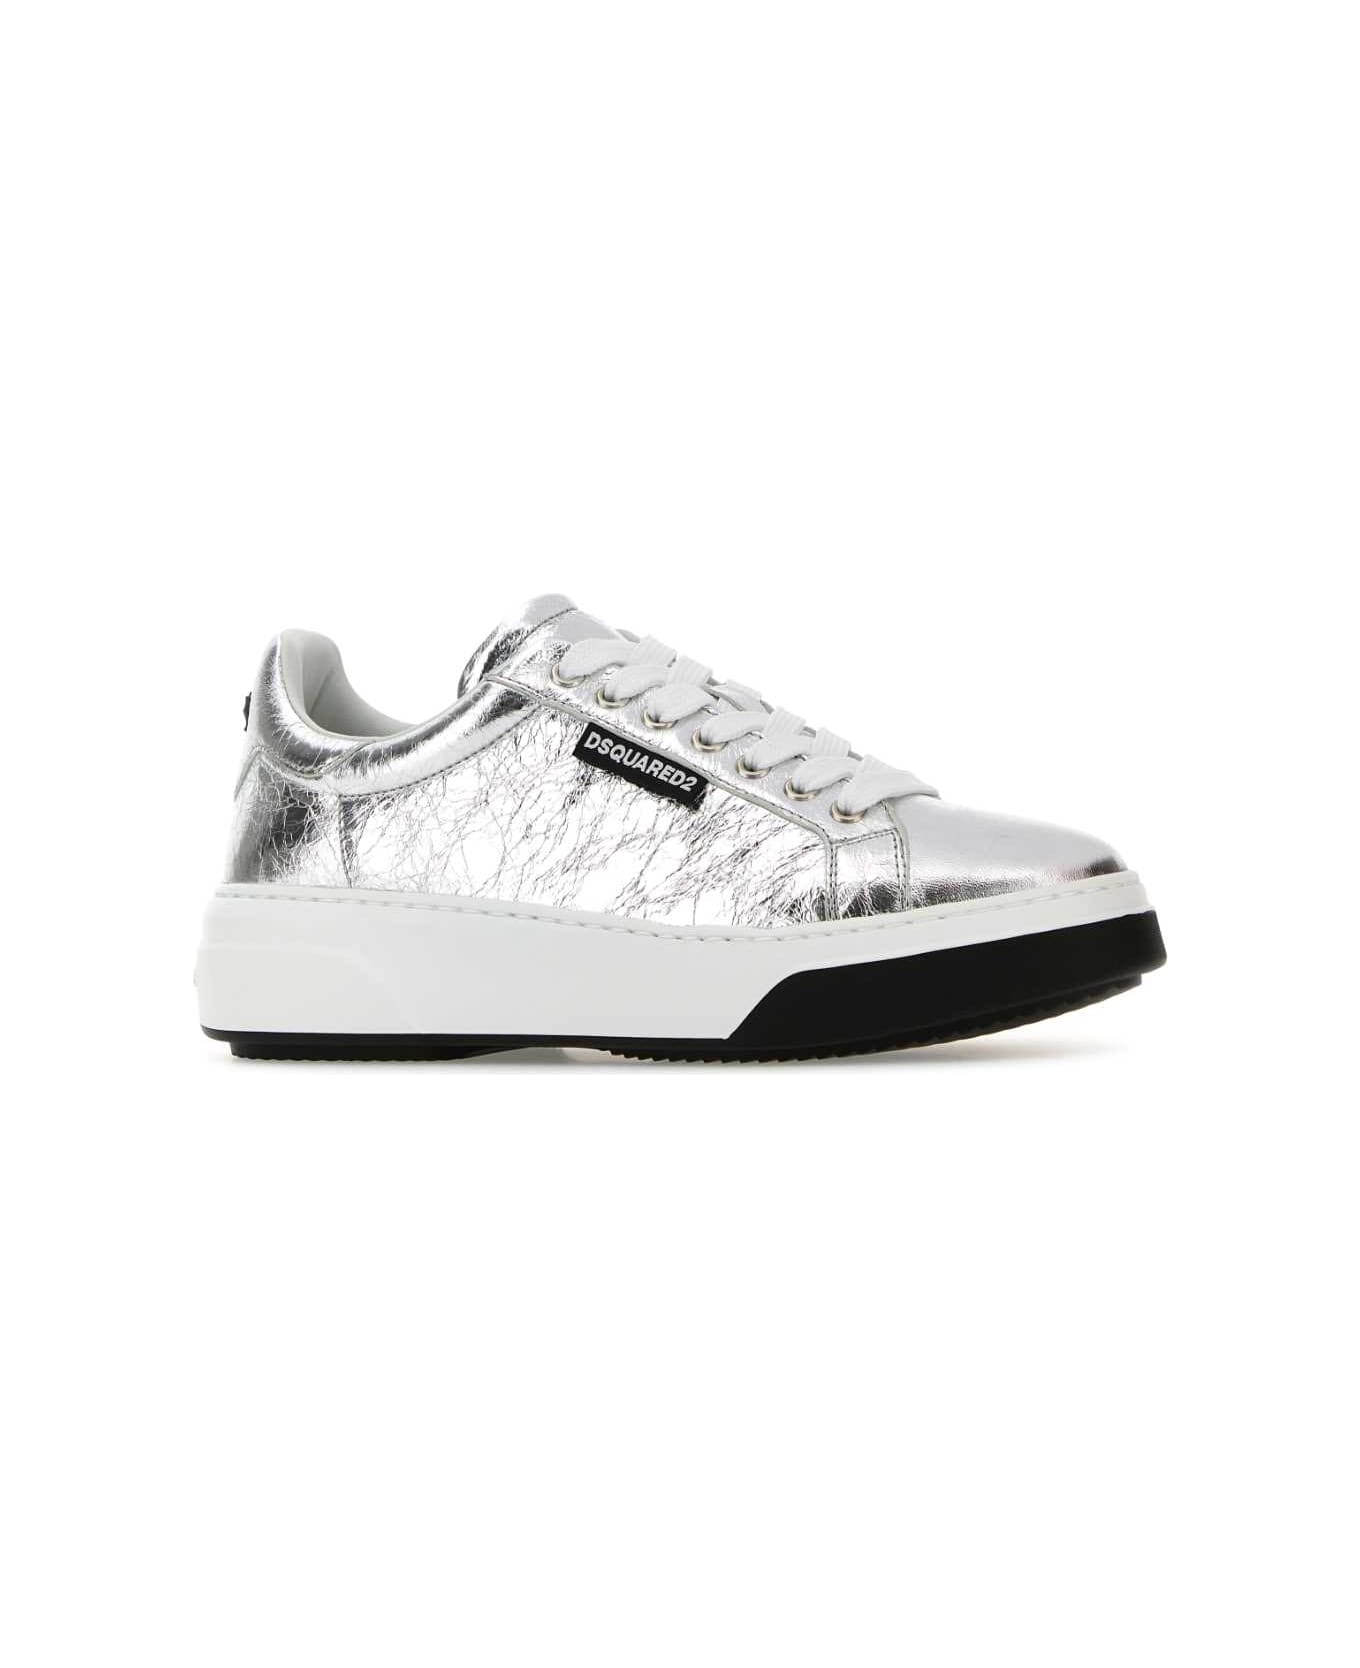 Dsquared2 Silver Leather Bumper Sneakers - ARGENTO